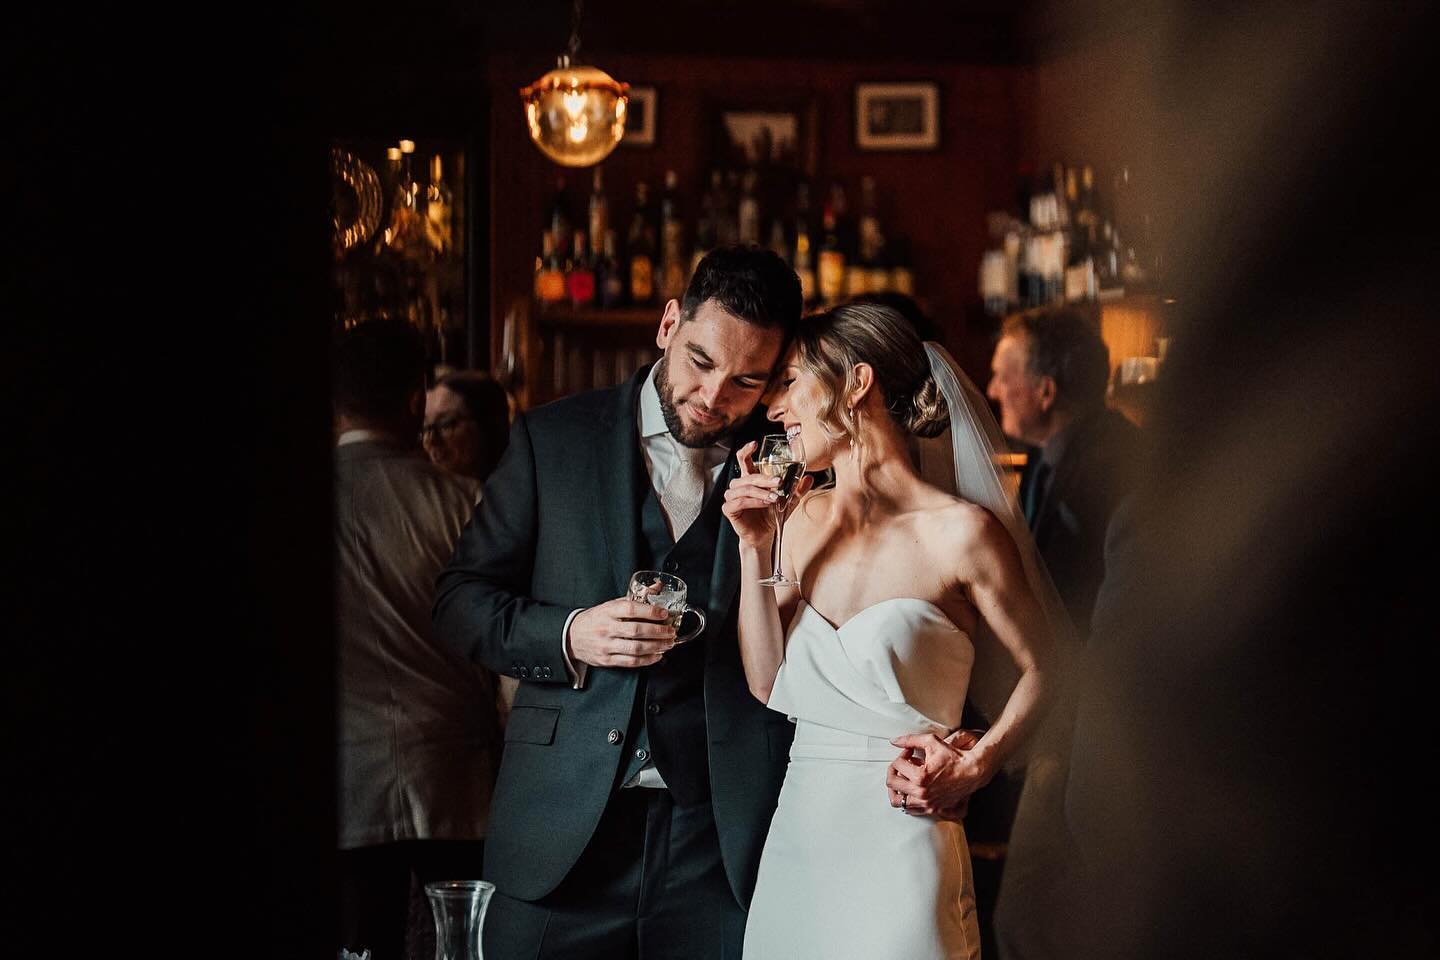 One of my favourite candid moments from Tom + Becca&rsquo;s lovely wedding day at @thezetterhotels in Clerkenwell.
.
.
.
.
.
#documentaryphotography #documentaryweddingphotography #documentaryweddingphotographer #londonwedding #londonweddingphotograp